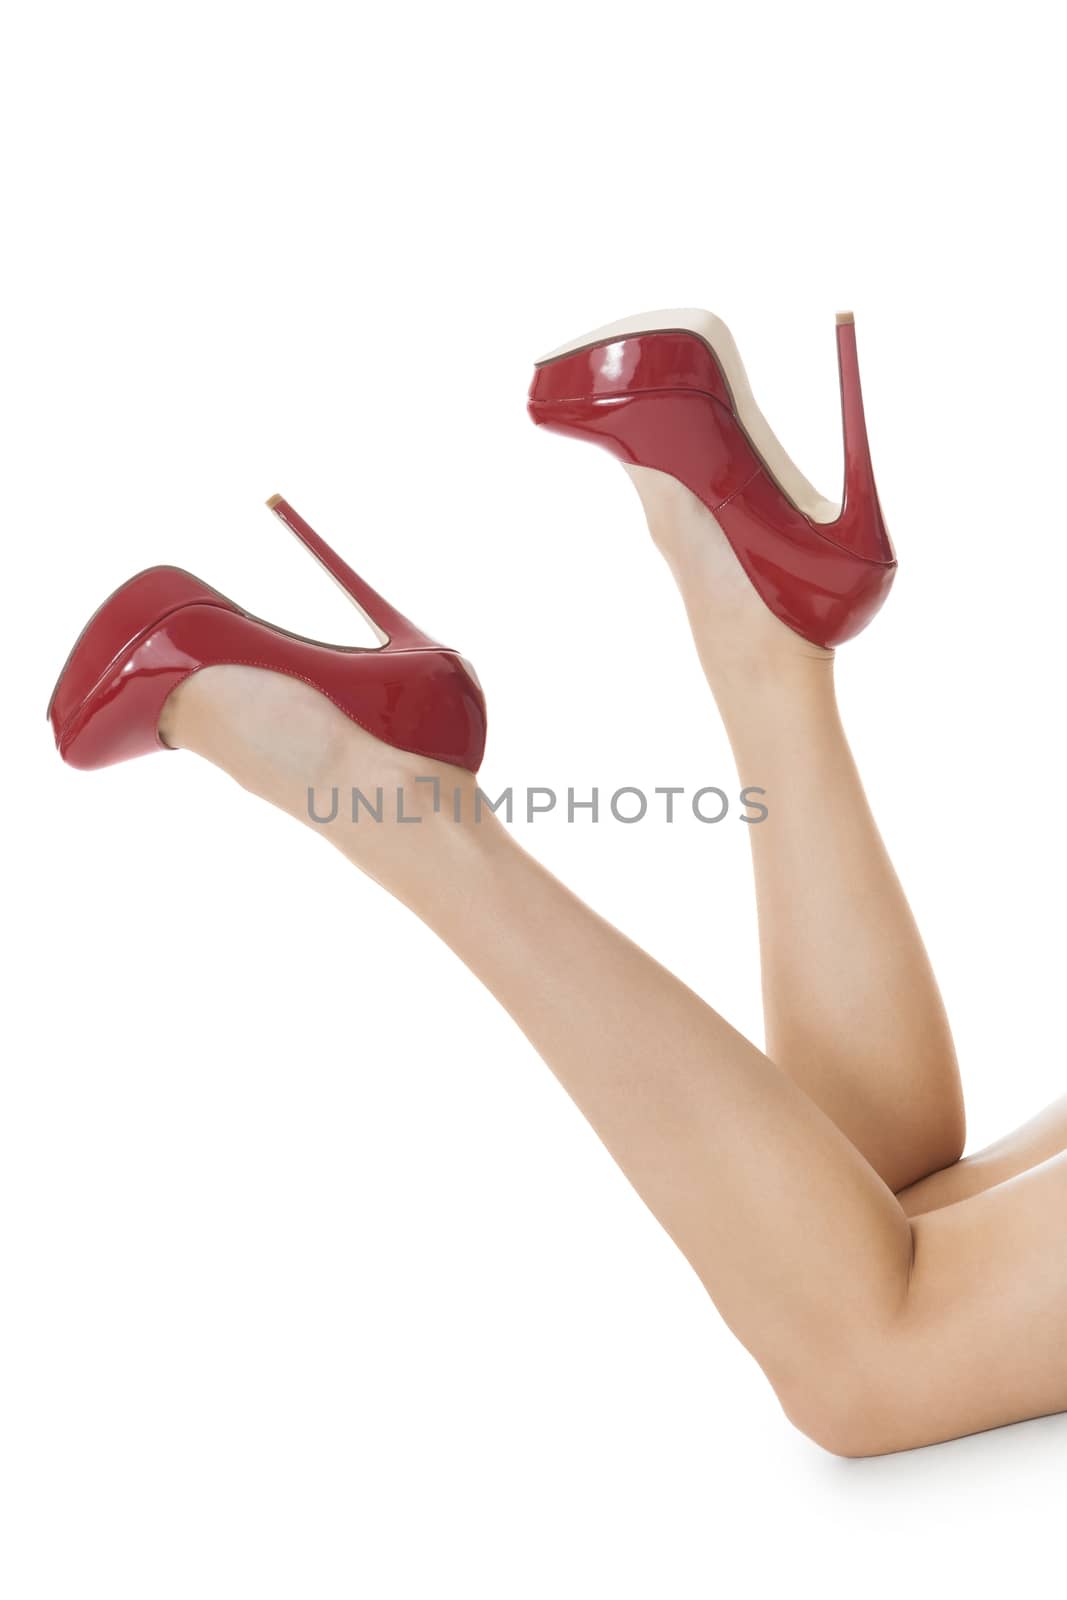 Flawless Woman Legs in Elegant Red High Heel Shoes, Isolated on White Background.